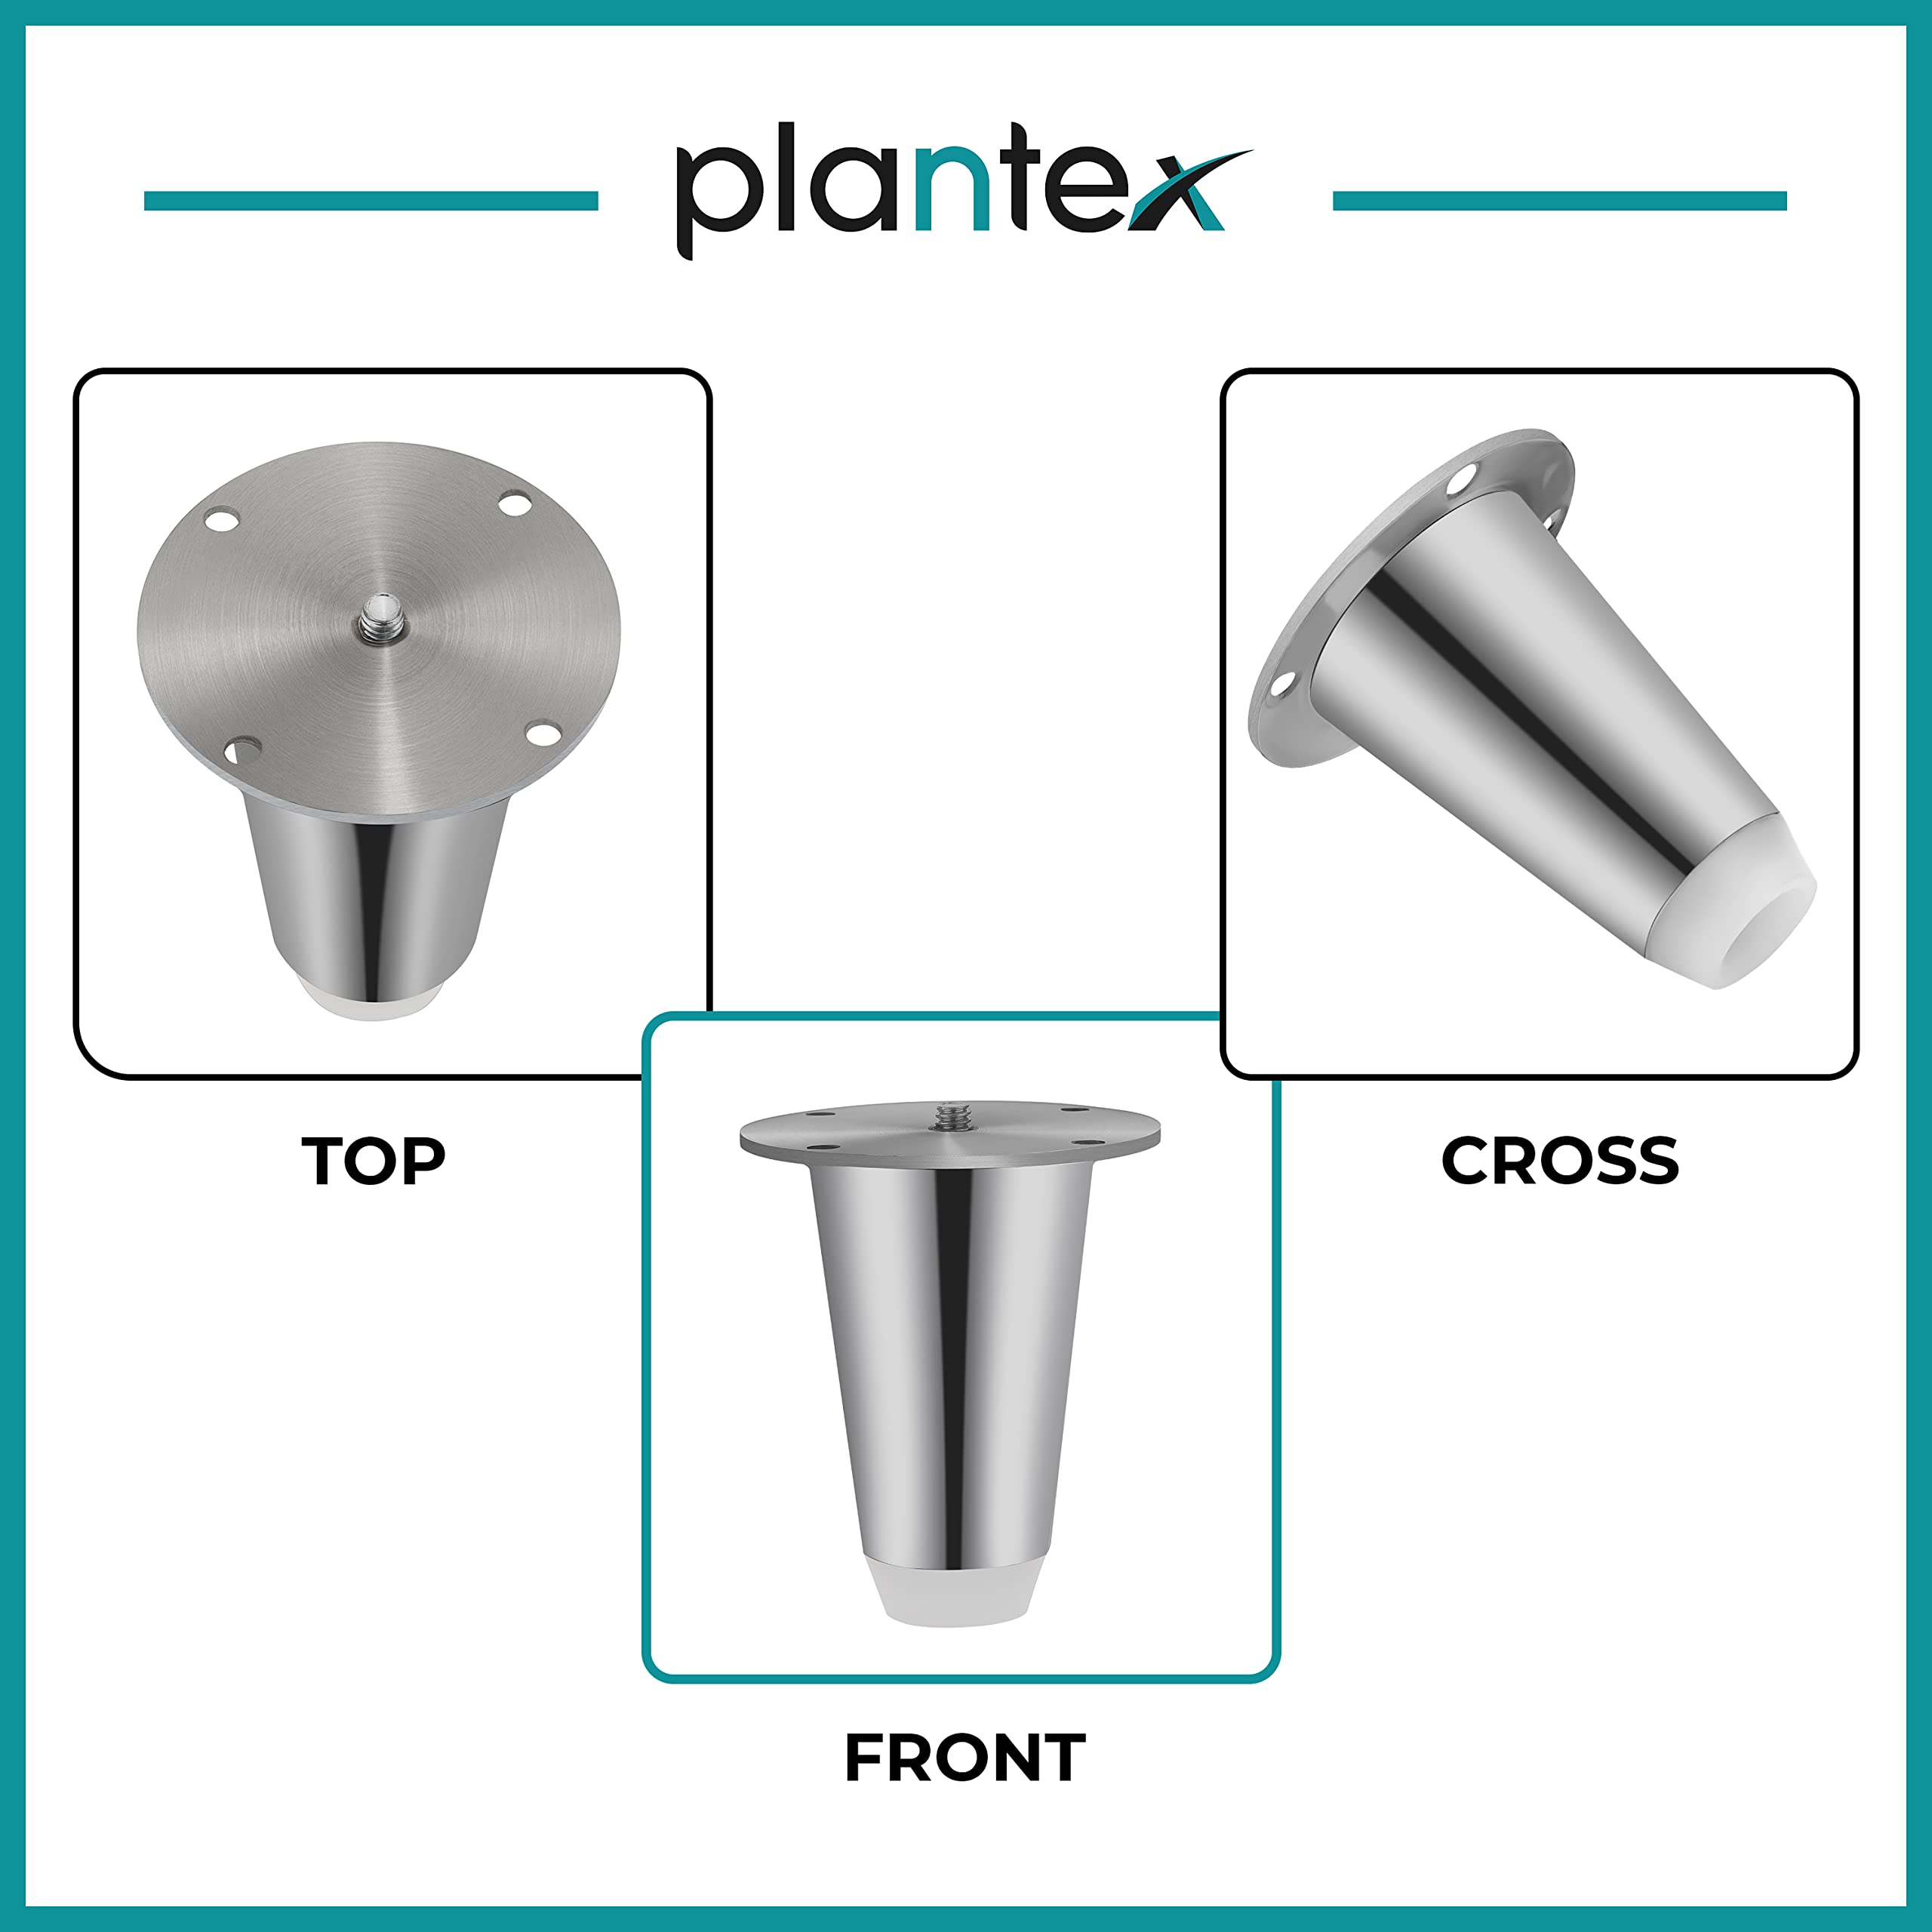 Plantex Heavy Duty Stainless Steel 3 inch Sofa Leg/Bed Furniture Leg Pair for Home Furnitures (DTS-53, Chrome) – 8 Pcs